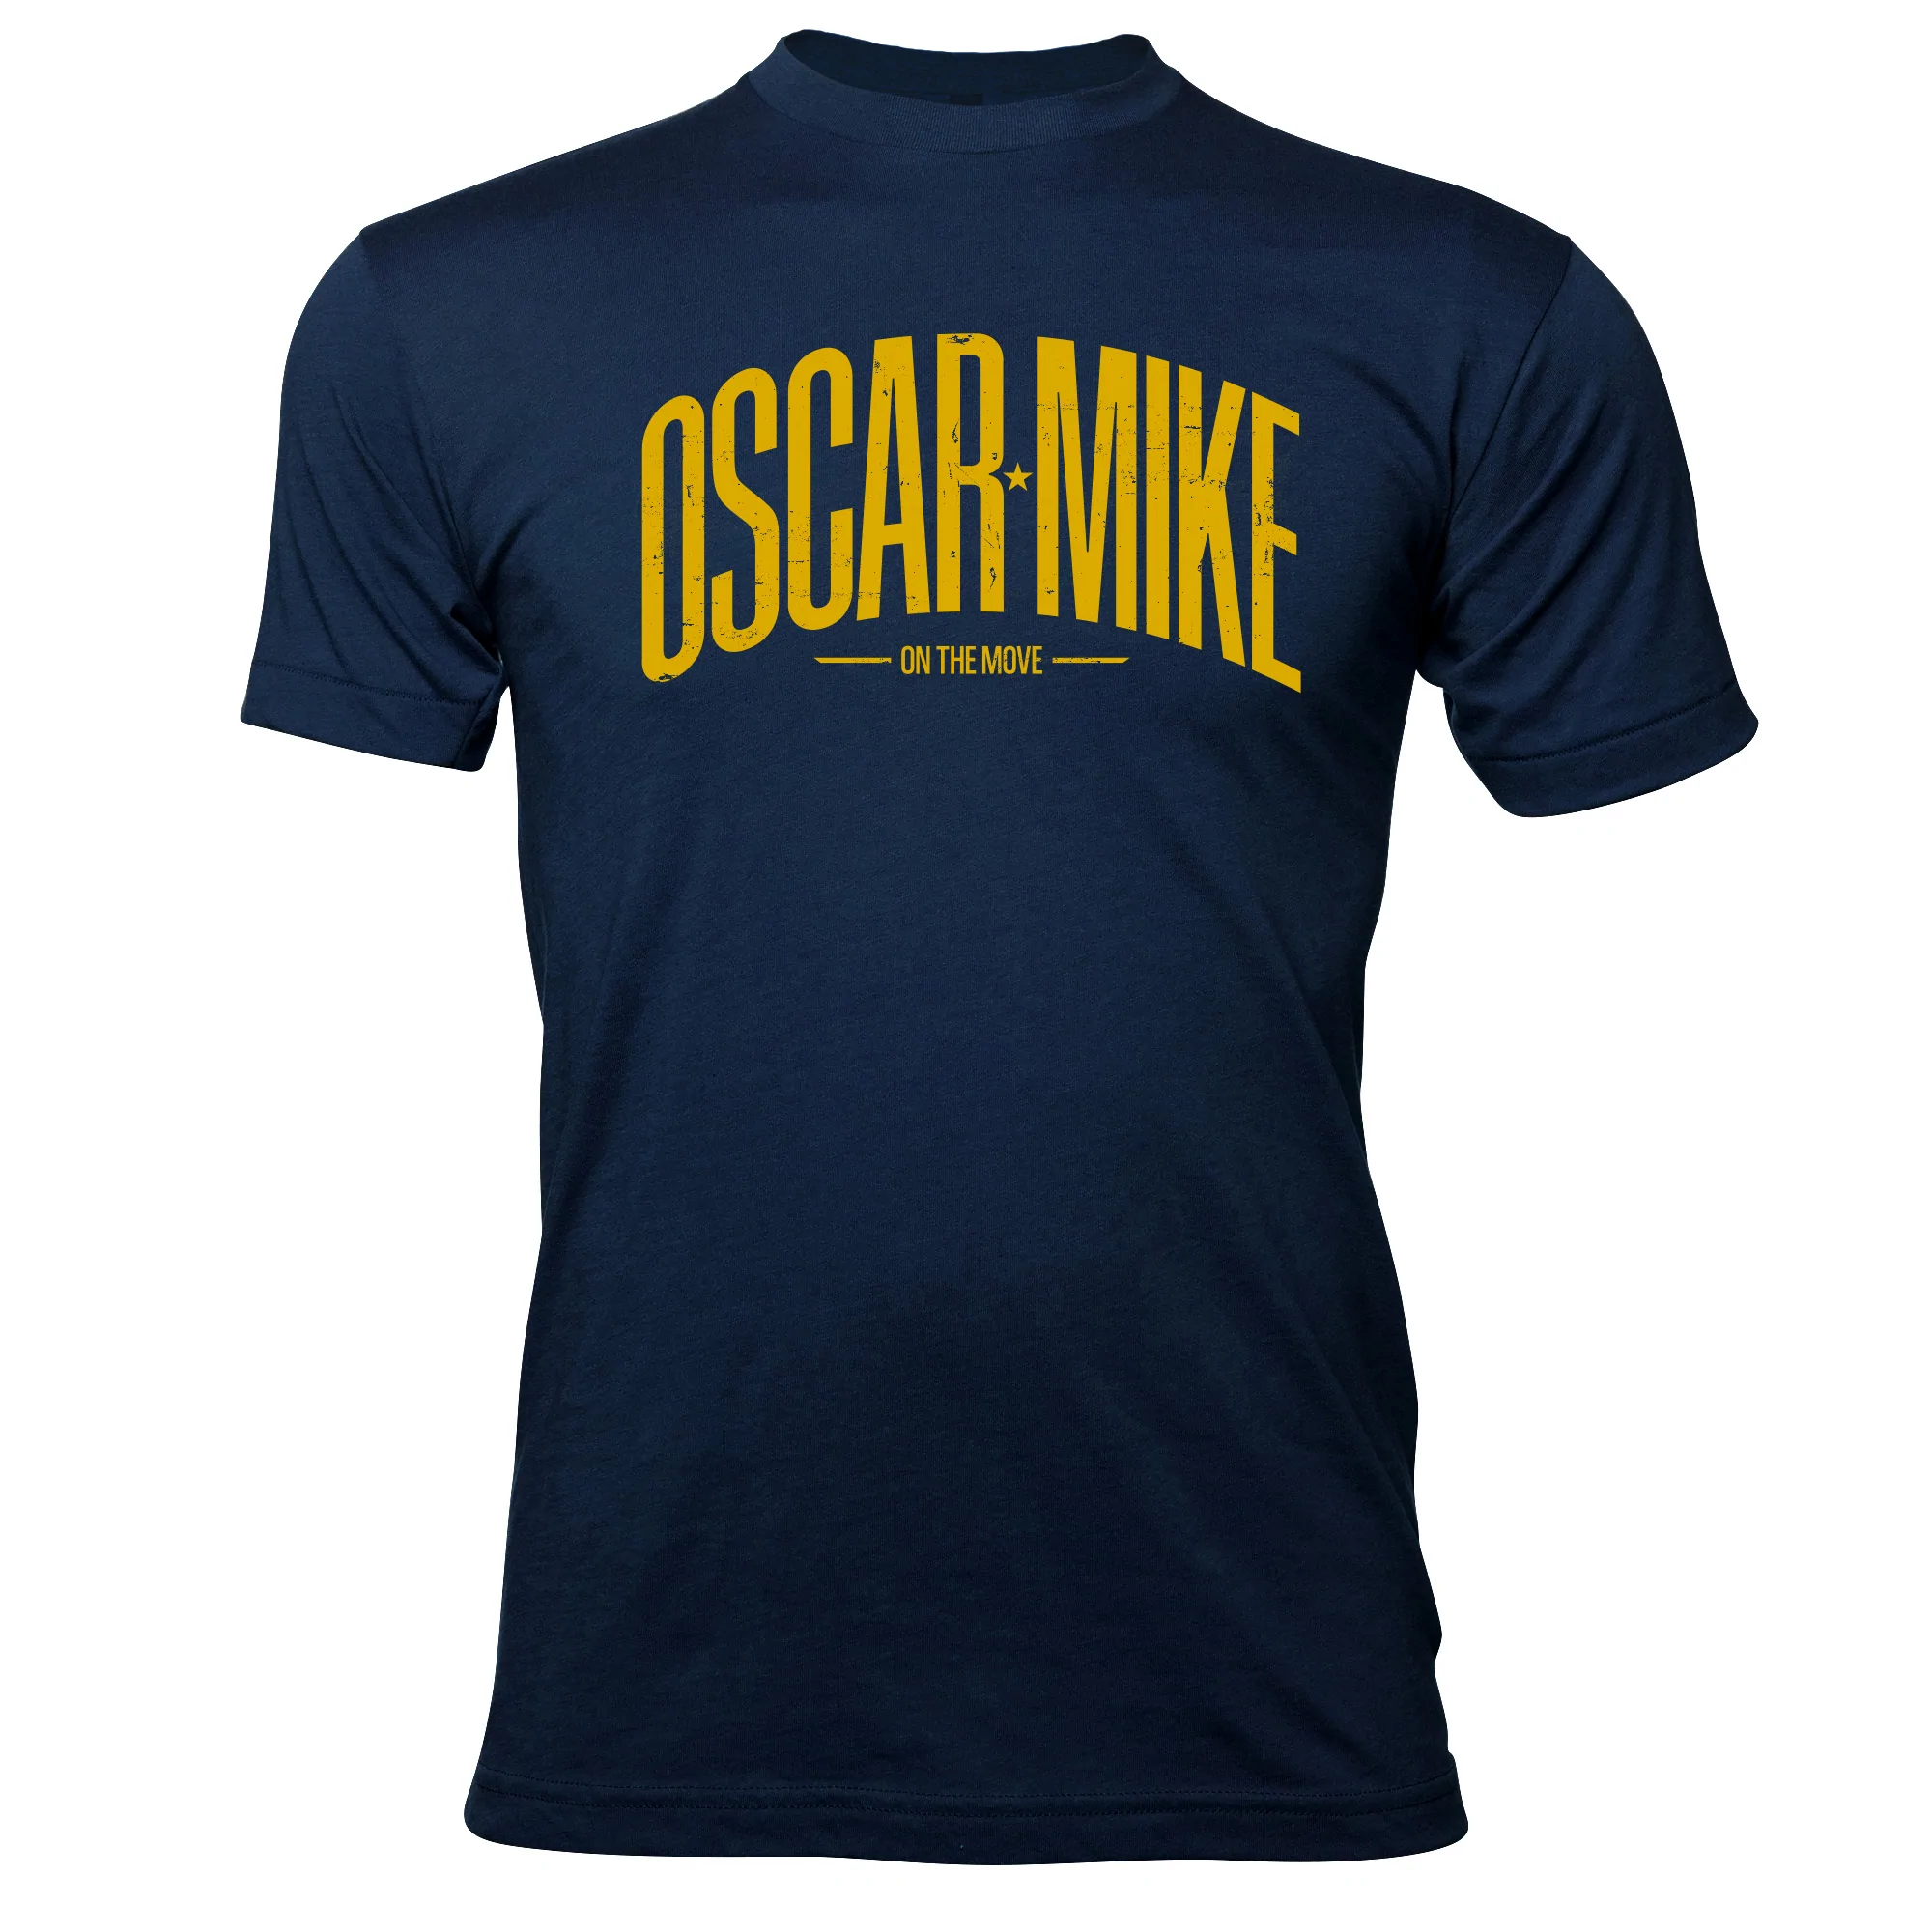 Oscar Mike Men's Arched Logo Tee posted by ProdOrigin USA in Men's Apparel